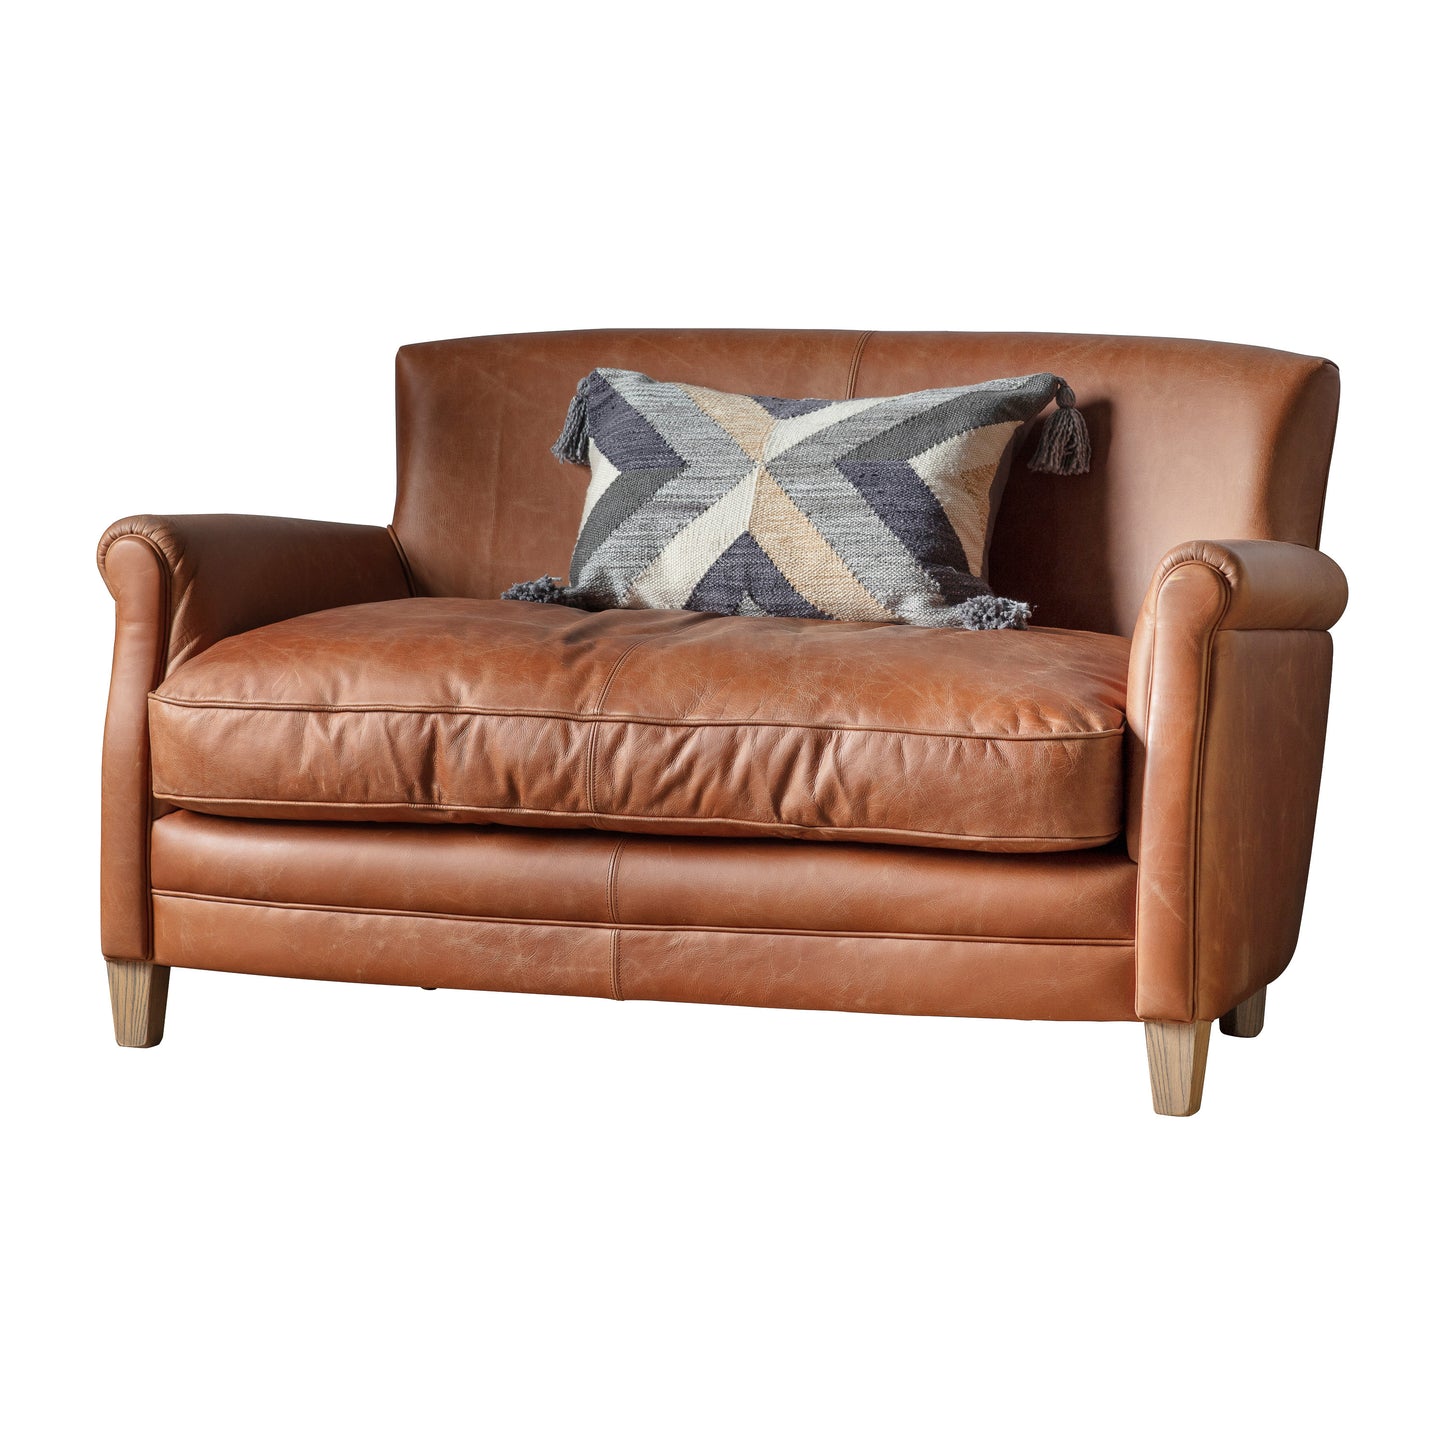 Theodore Sofa - Vintage Brown Leather